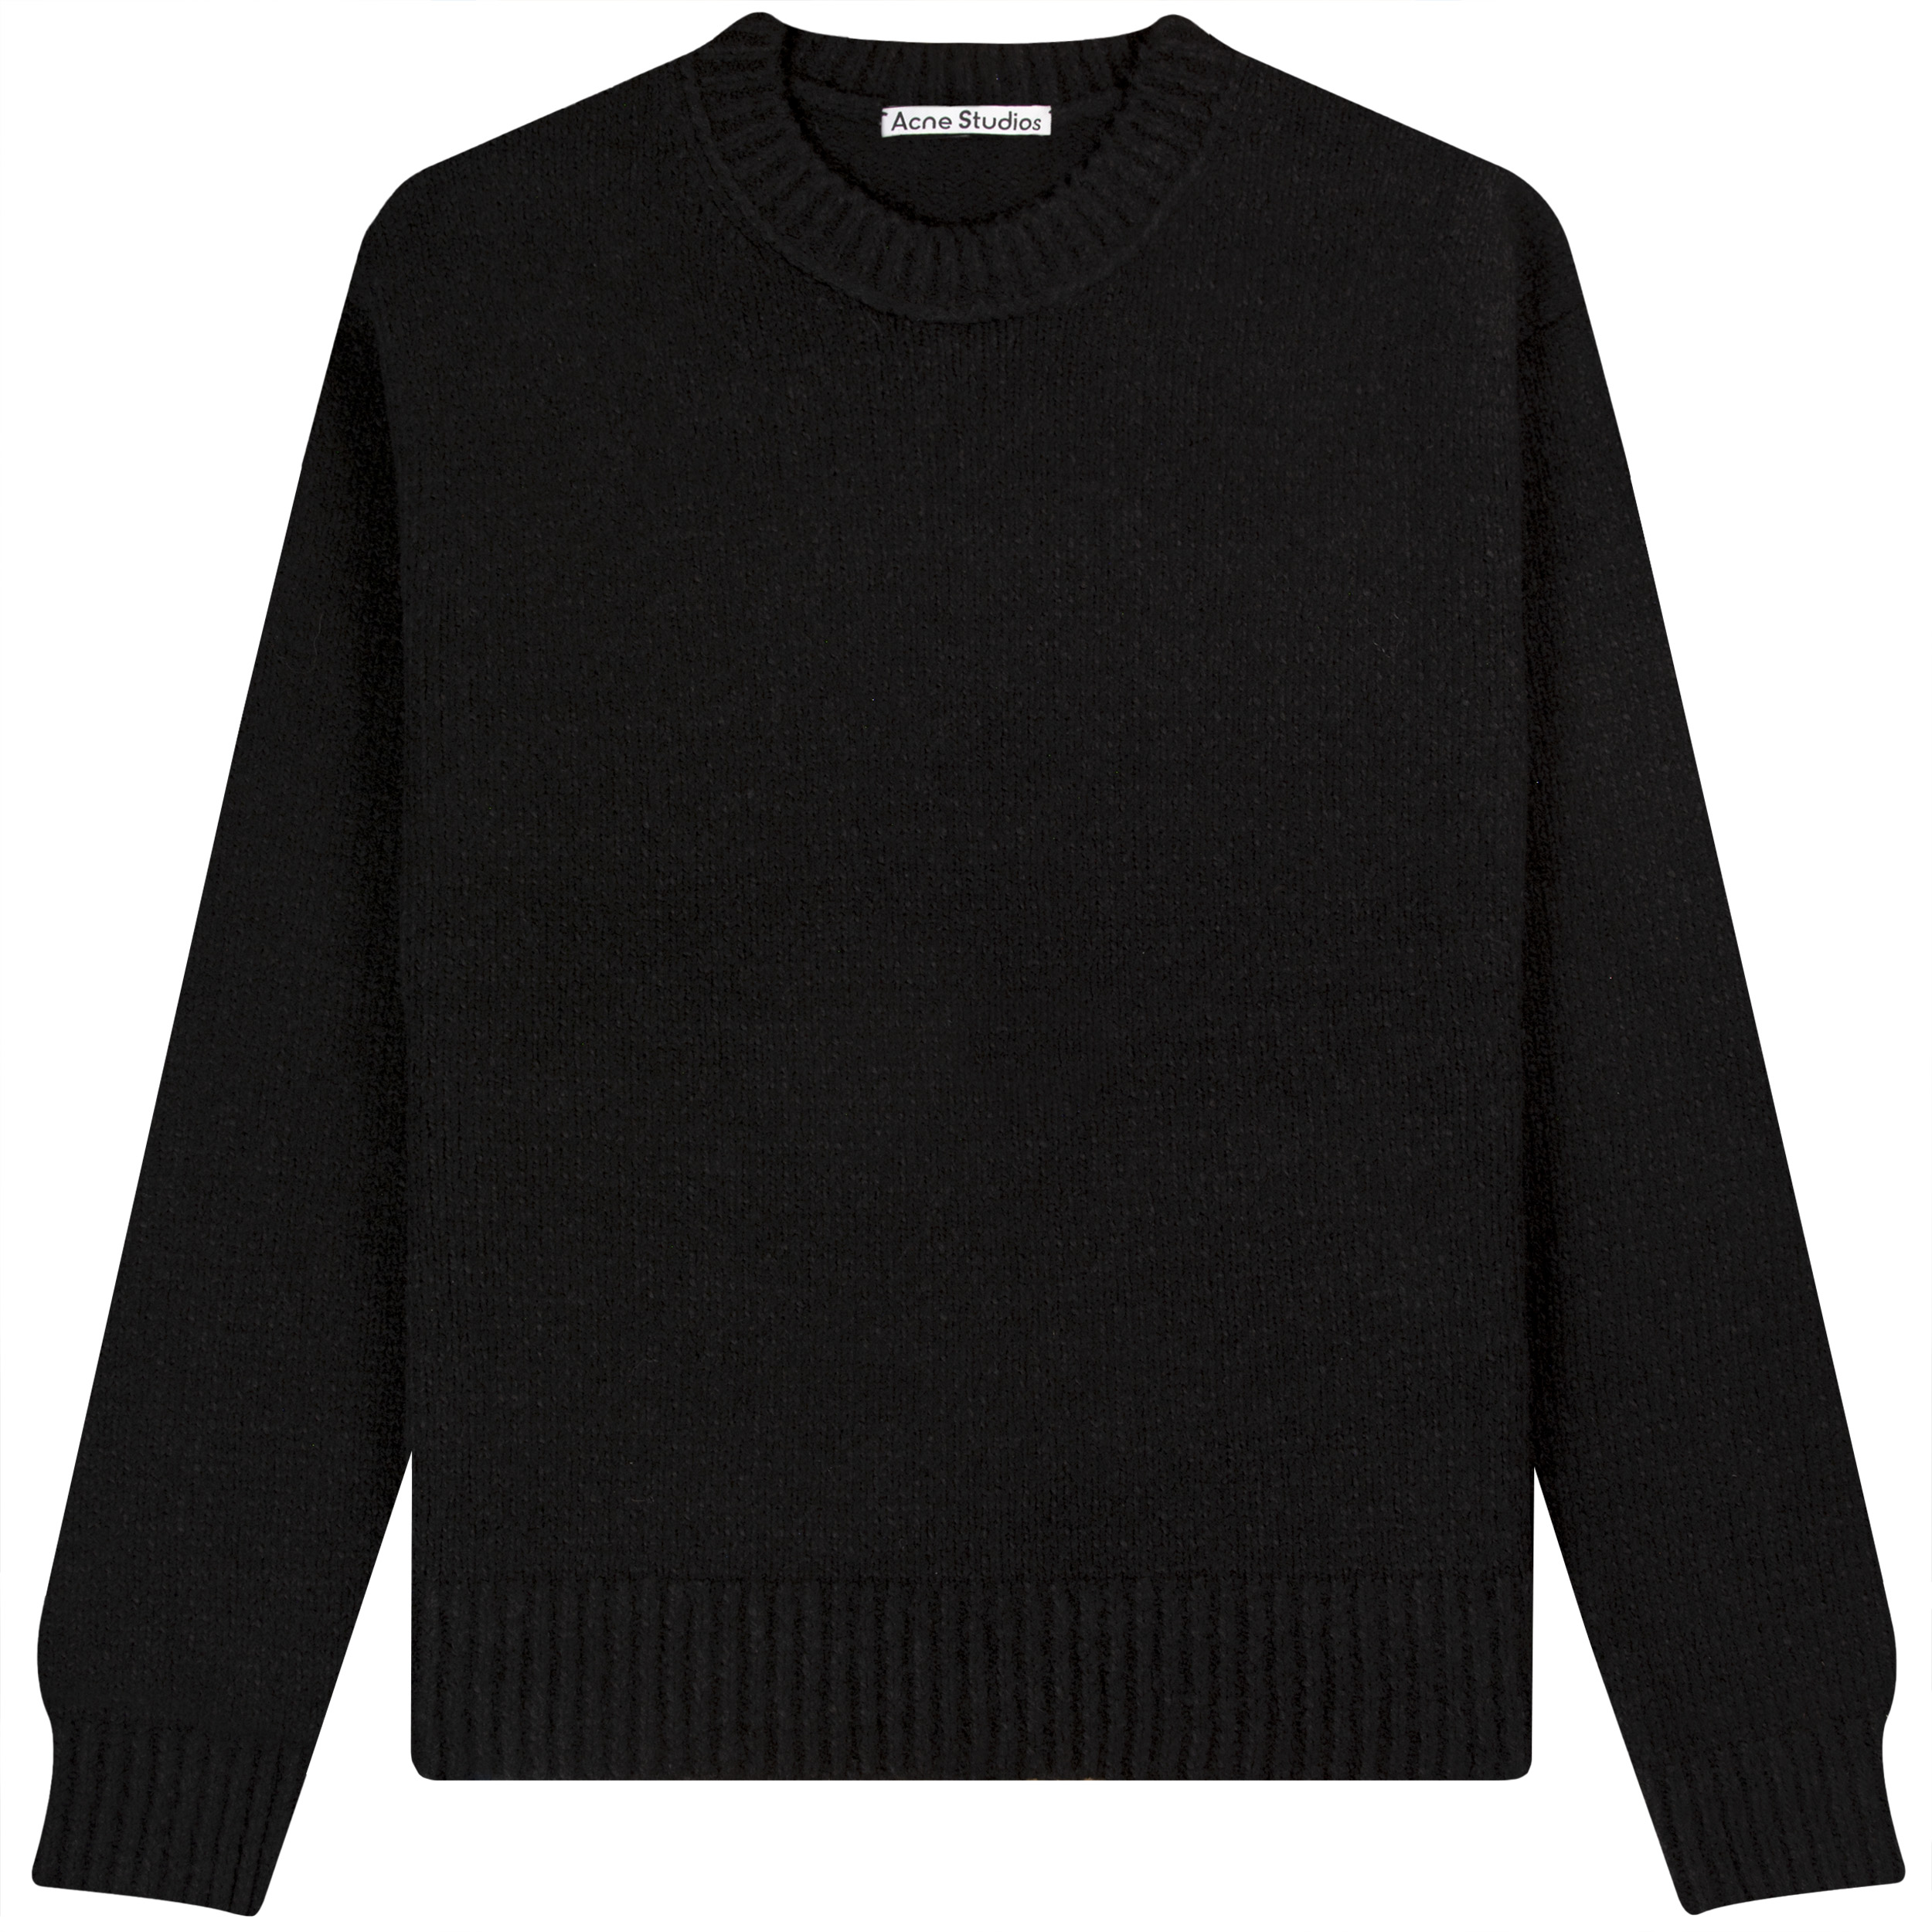 Acne Studios Knitted Wool Crew Neck Knit Black